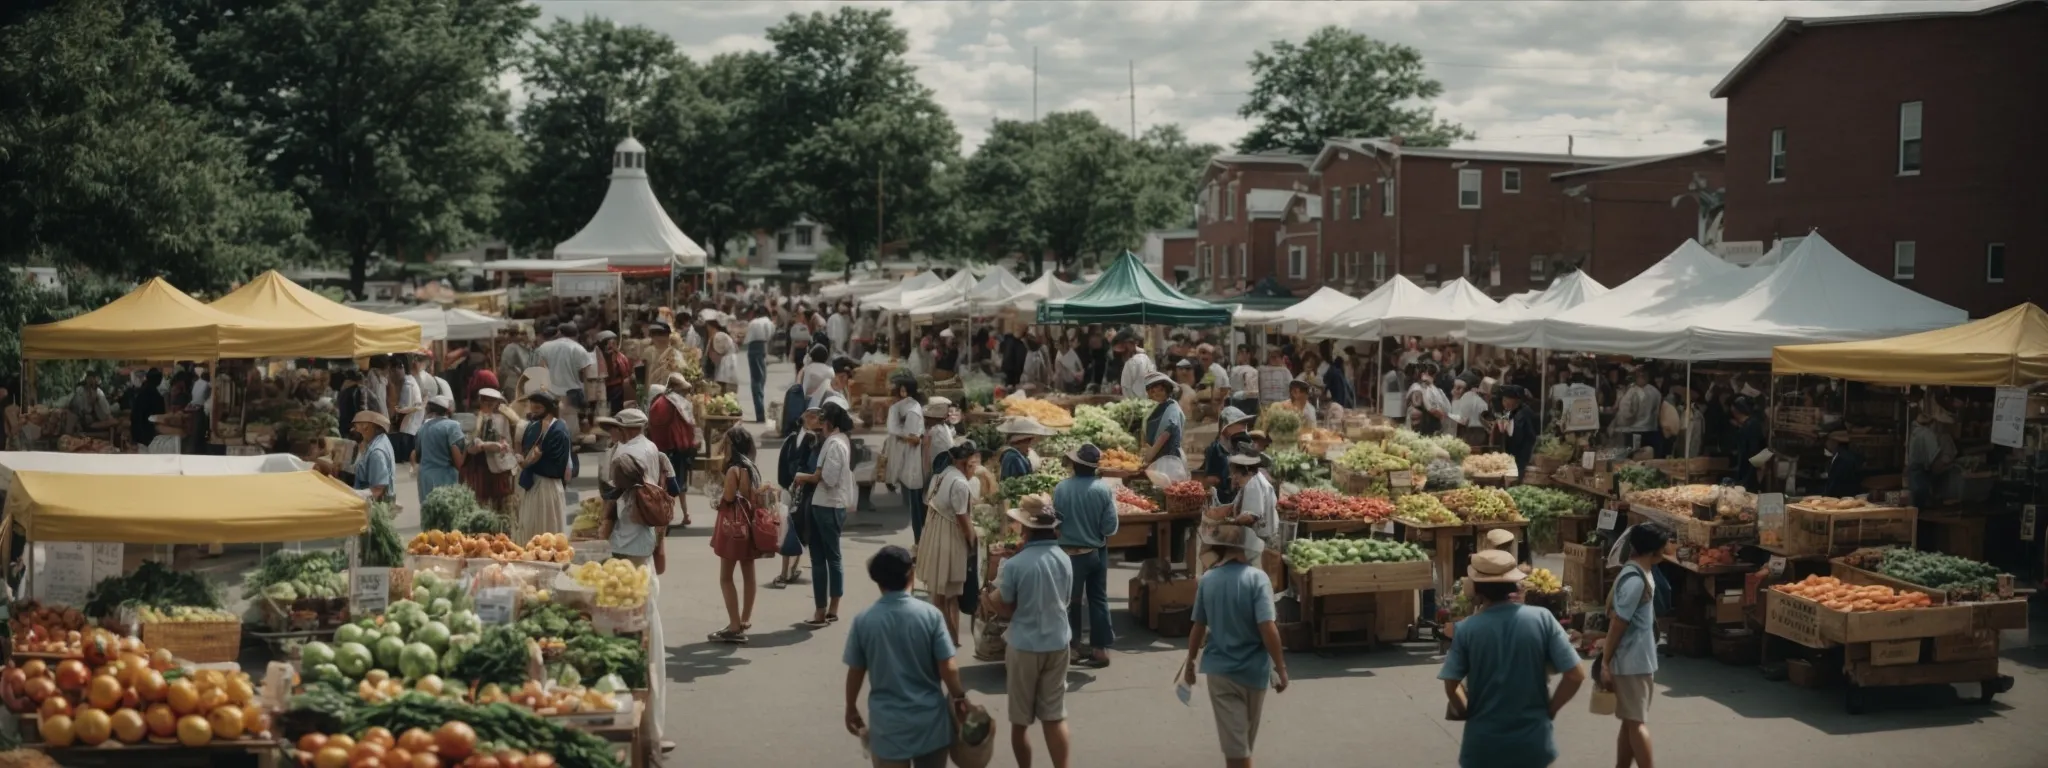 a bustling local farmer's market brimming with community engagement.